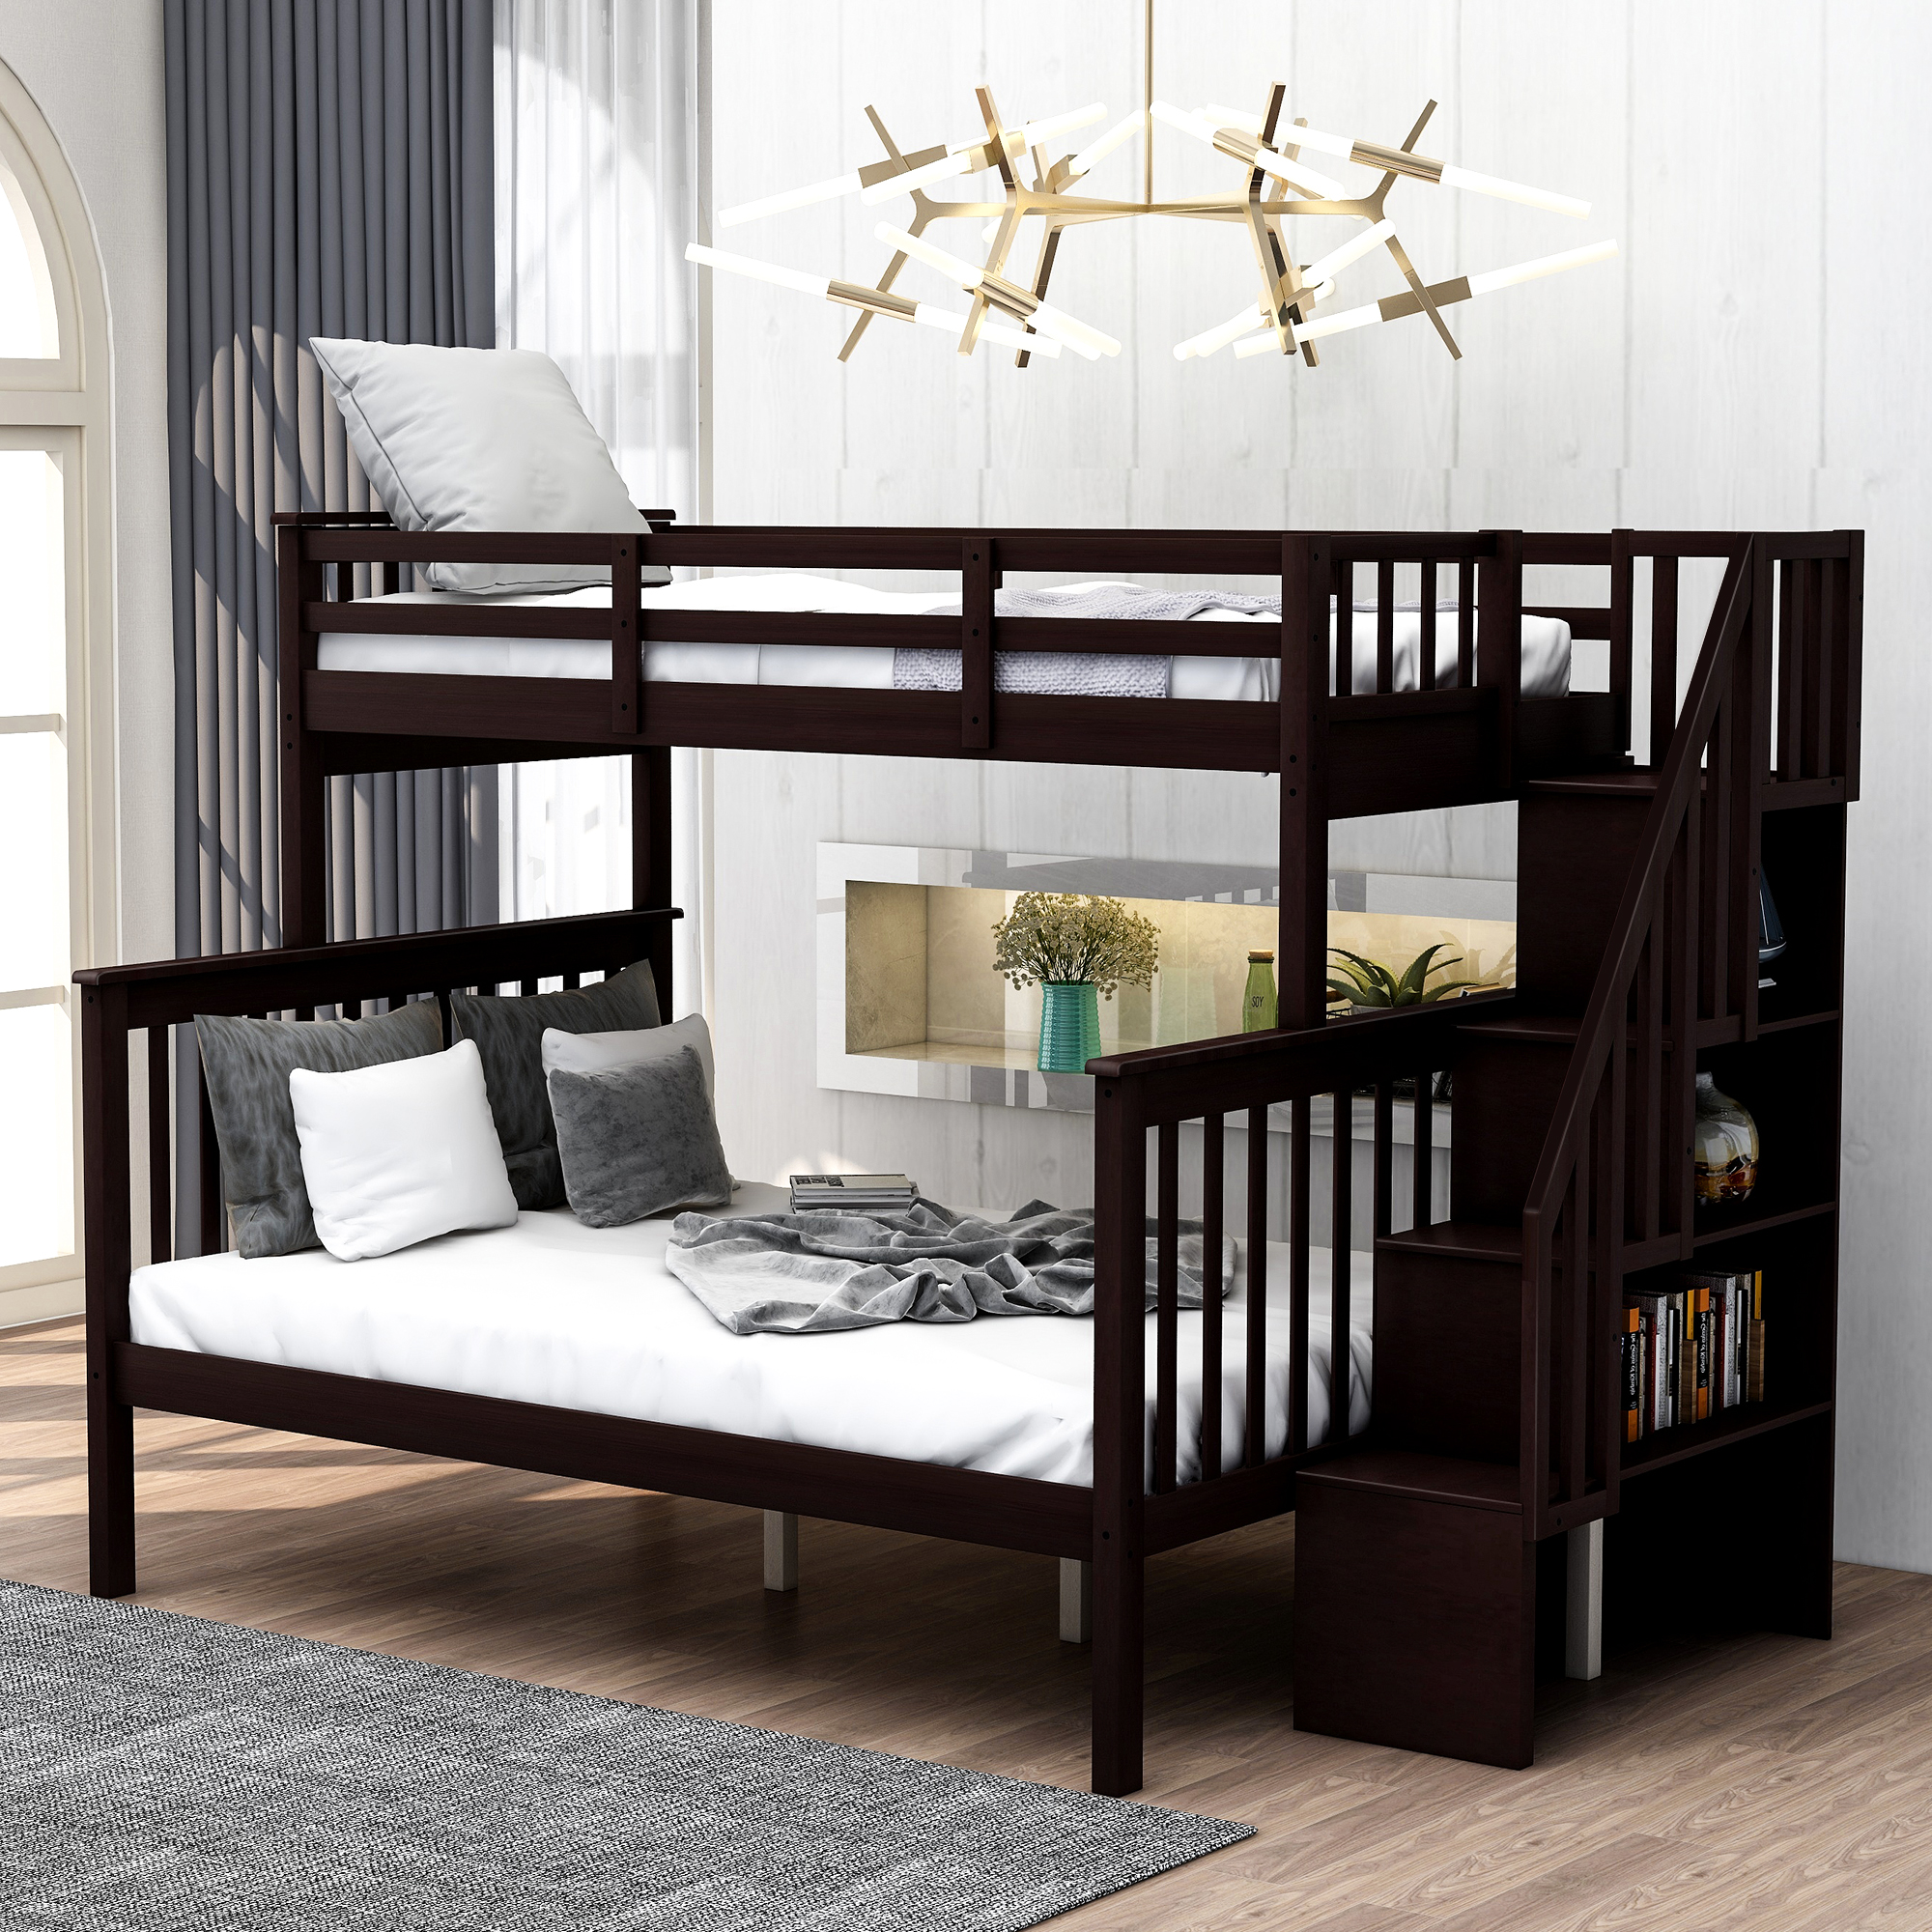 Stairway Twin-Over-Full Bunk Bed with Storage and Guard Rail for Bedroom, Espresso color-Boyel Living